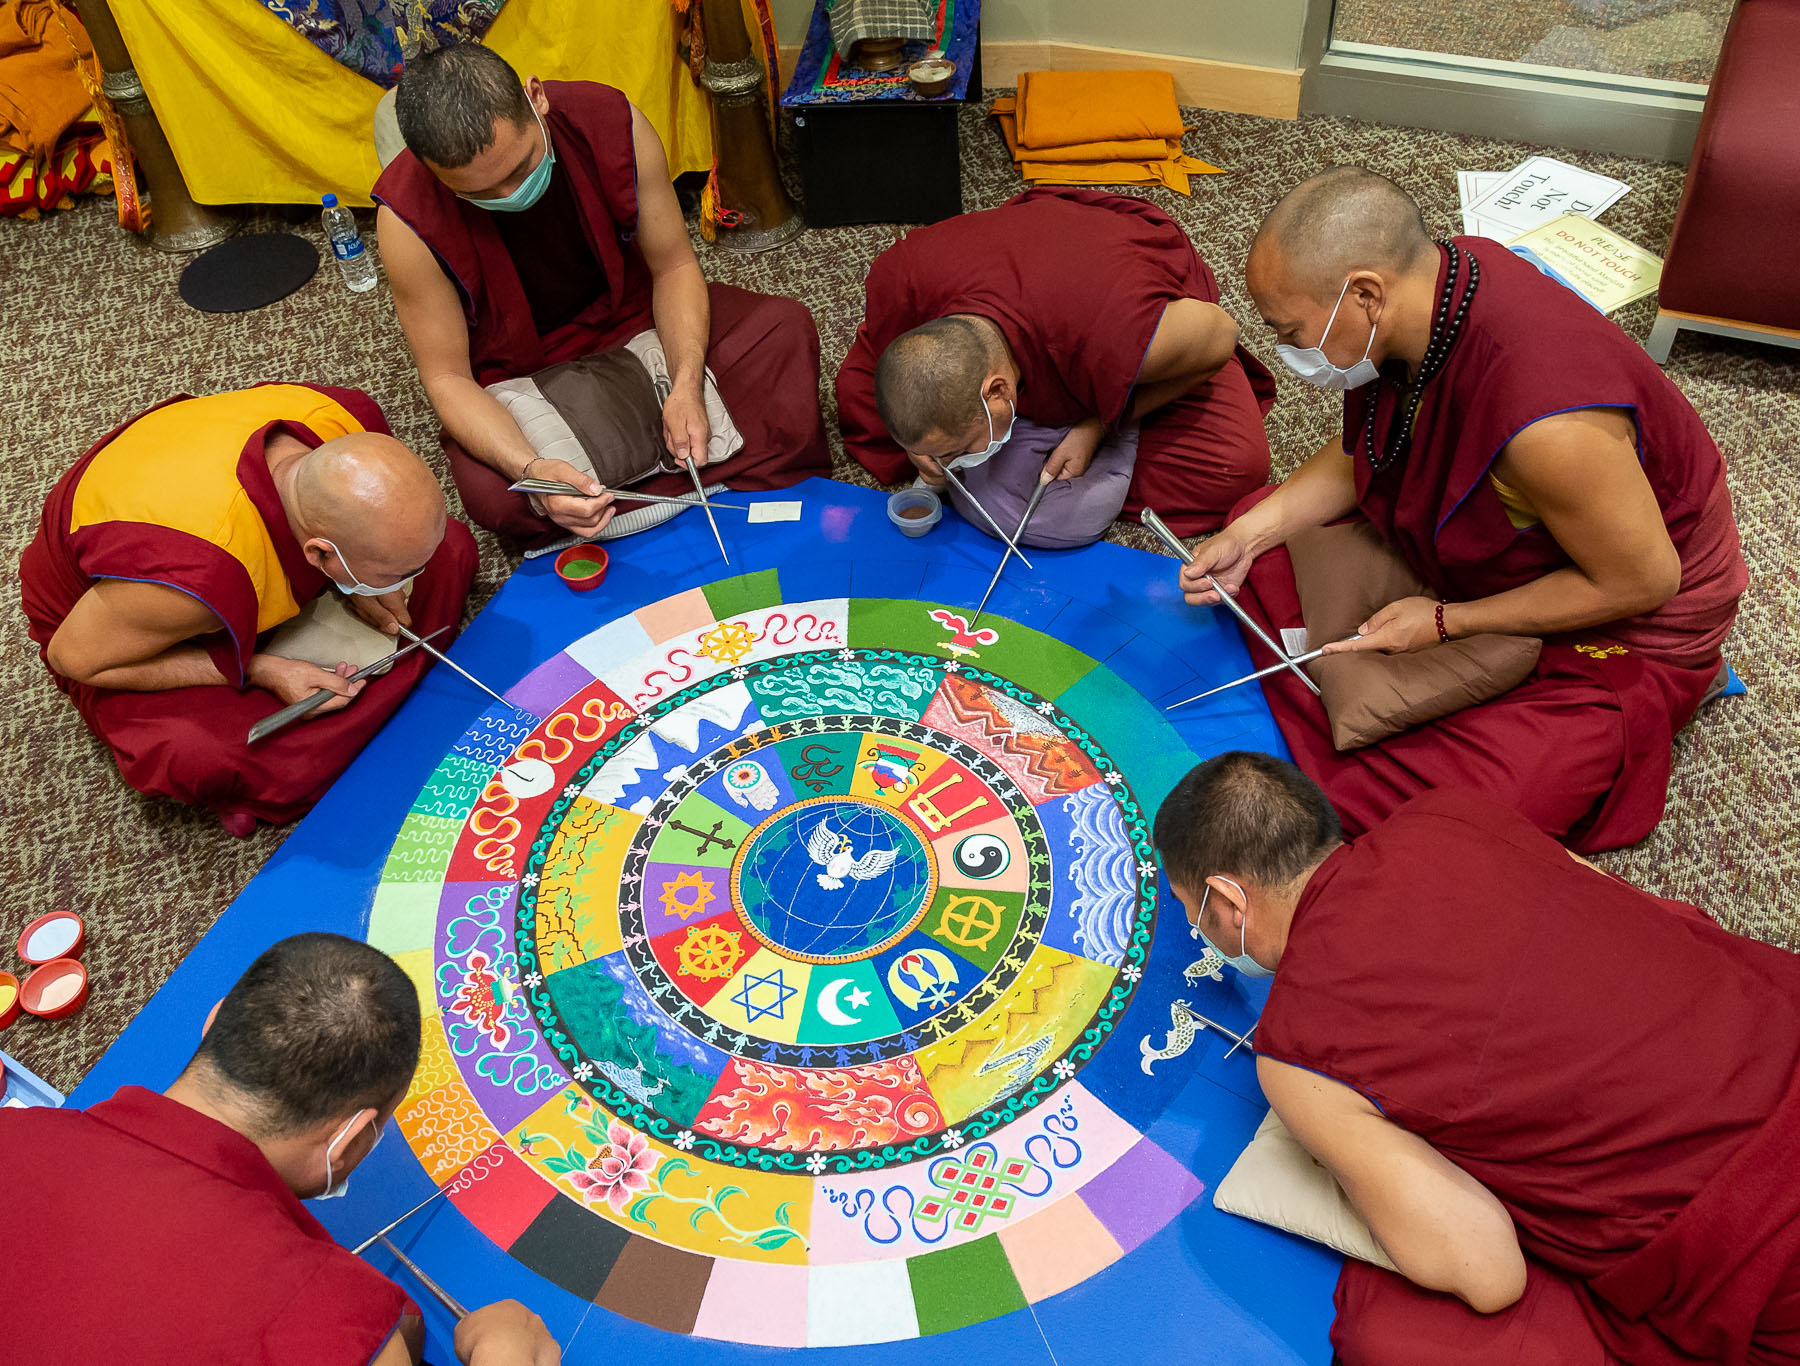 After five days of slow, meticulous progress, several monks work together to finish the mandala on Friday. (DePaul University/Jeff Carrion)